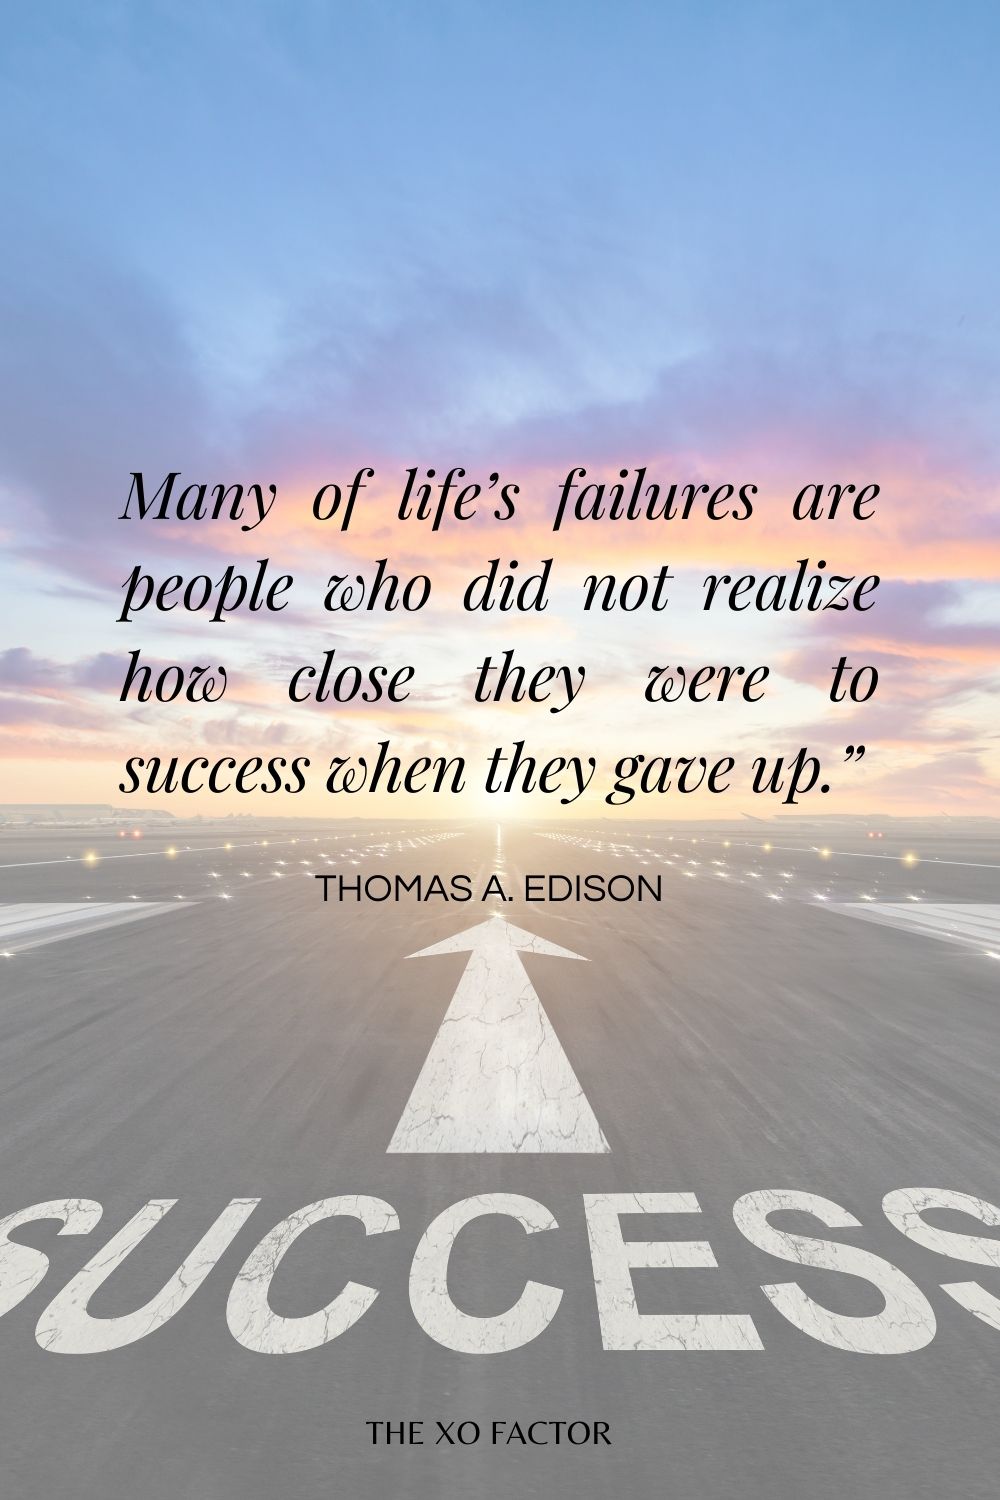 Many of life’s failures are people who did not realize how close they were to success when they gave up.”– Thomas A. Edison